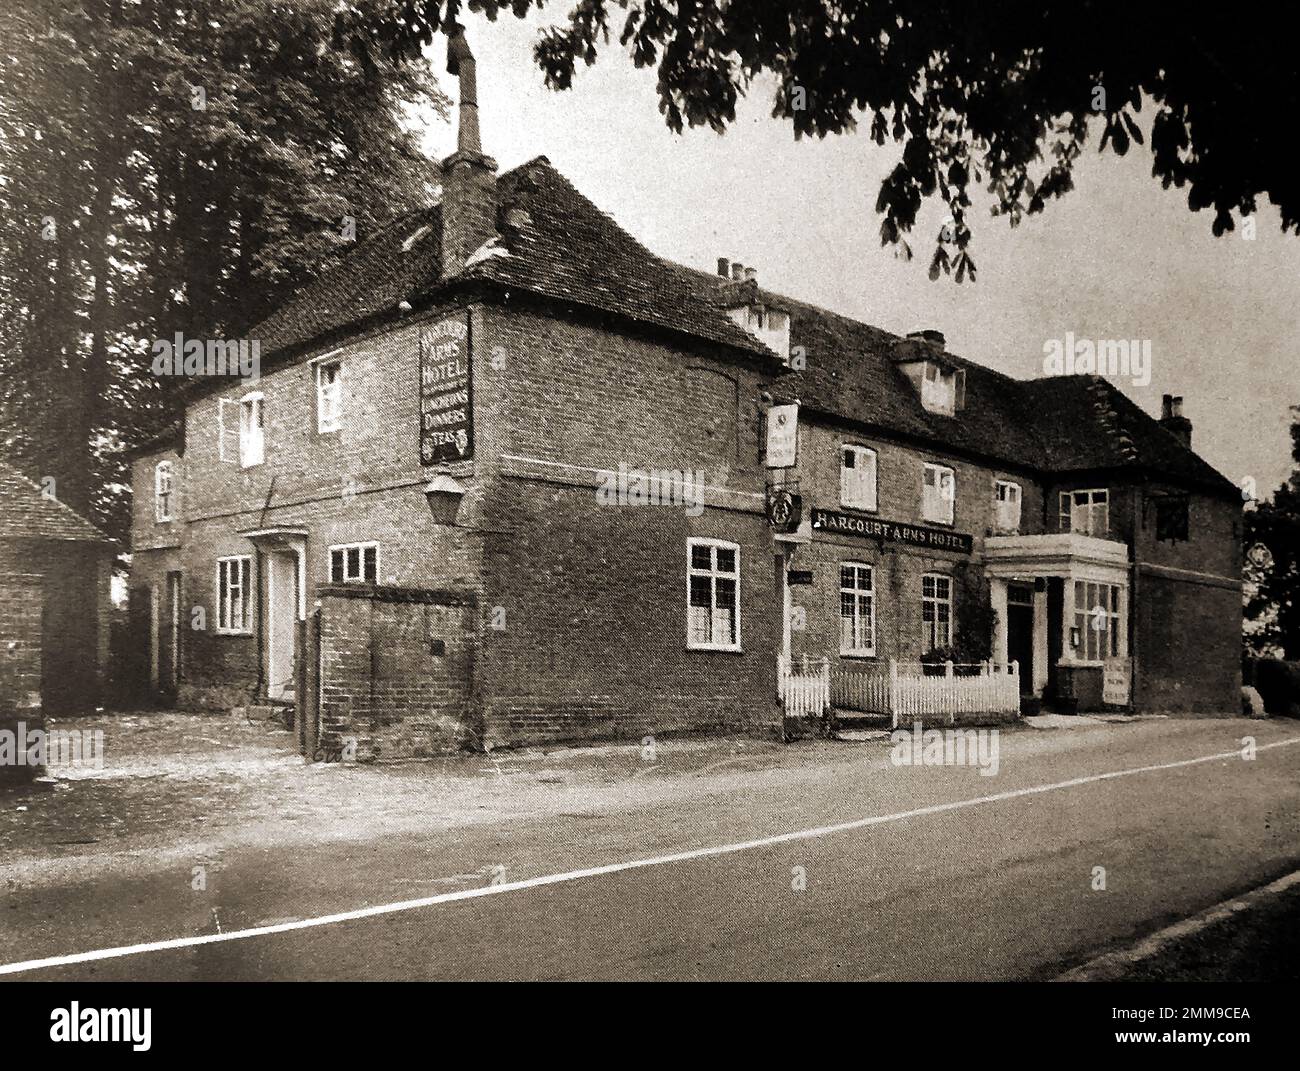 British pubs inns & taverns - A circa 1940 old photograph of the  Grade II listed Harcourt Arms, Nuneham Courtney, built as a model pub in a new model village 1762. later to be extended and altered in the 19th century. Stock Photo